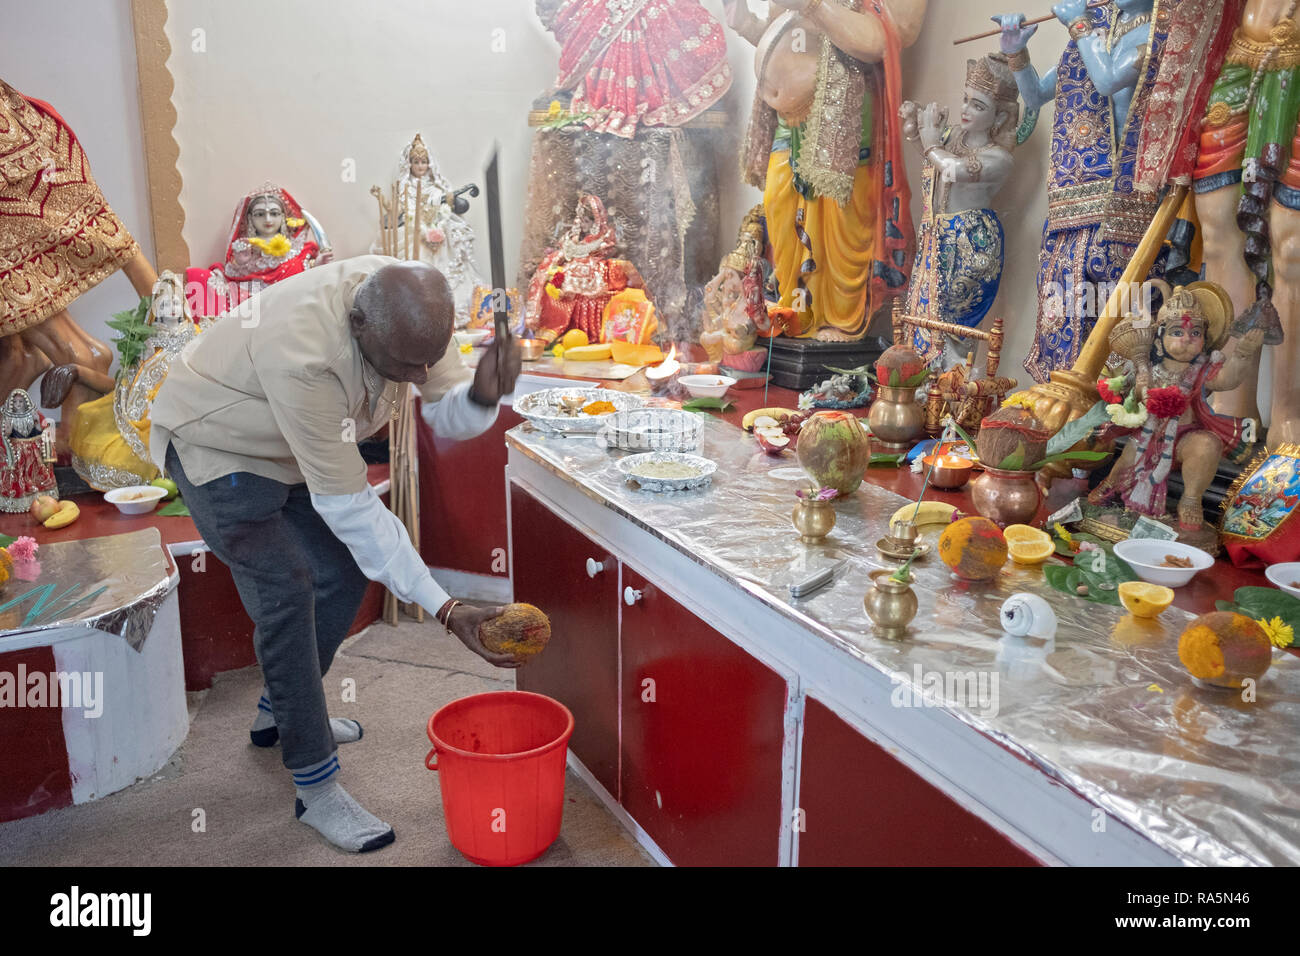 An older Hindu worshipper breaks a coconut shell, symbolic of breaking the ego to attain spiritual & personal development. In Jamaica, Queens, NYC. Stock Photo